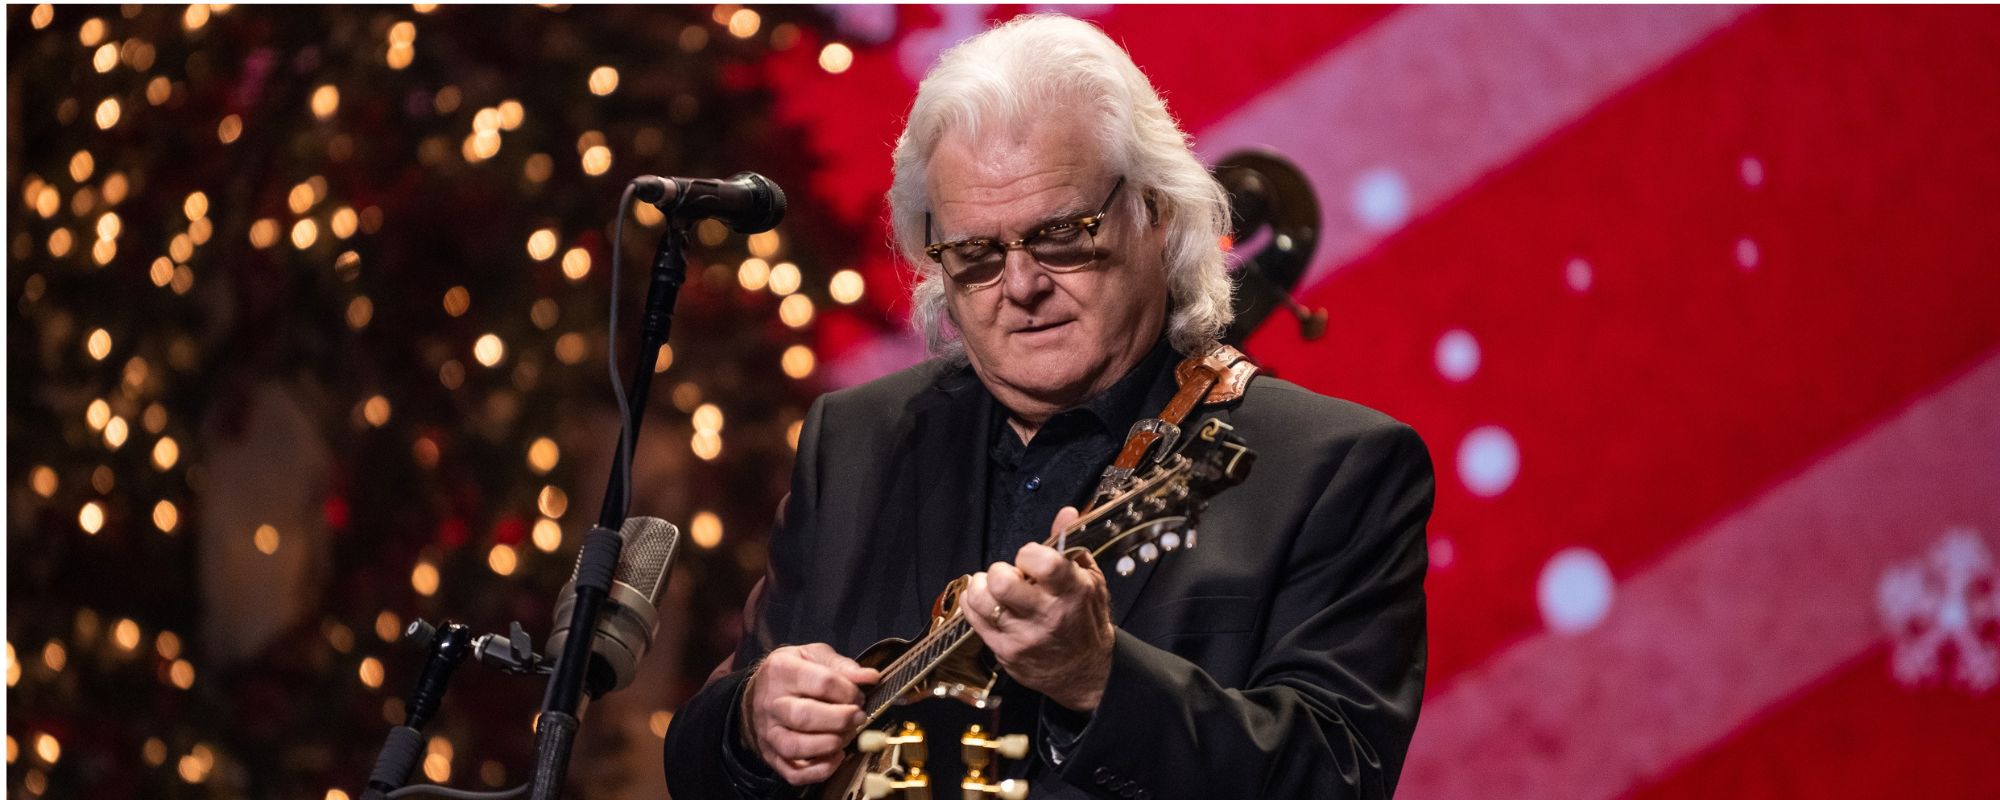 Ricky Skaggs and Kentucky Thunder to Bring Joy in December with Holiday Tour